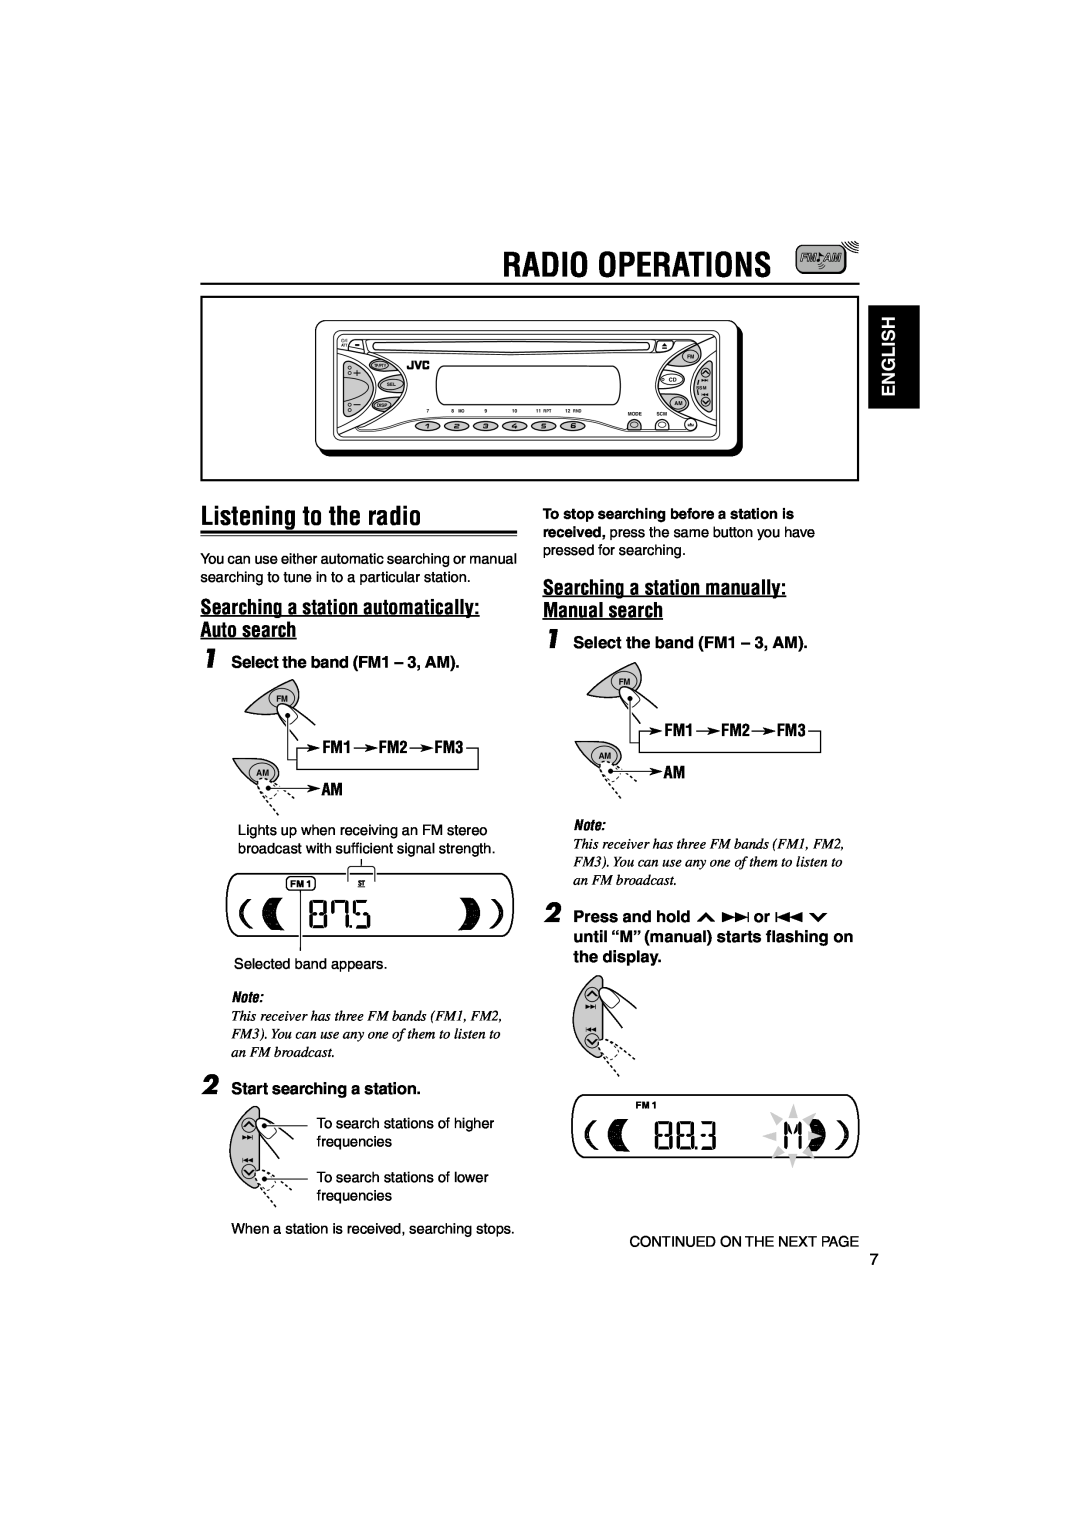 JVC KD-S743R Radio Operations, Listening to the radio, Searching a station automatically Auto search, English, FM1 FM2 FM3 